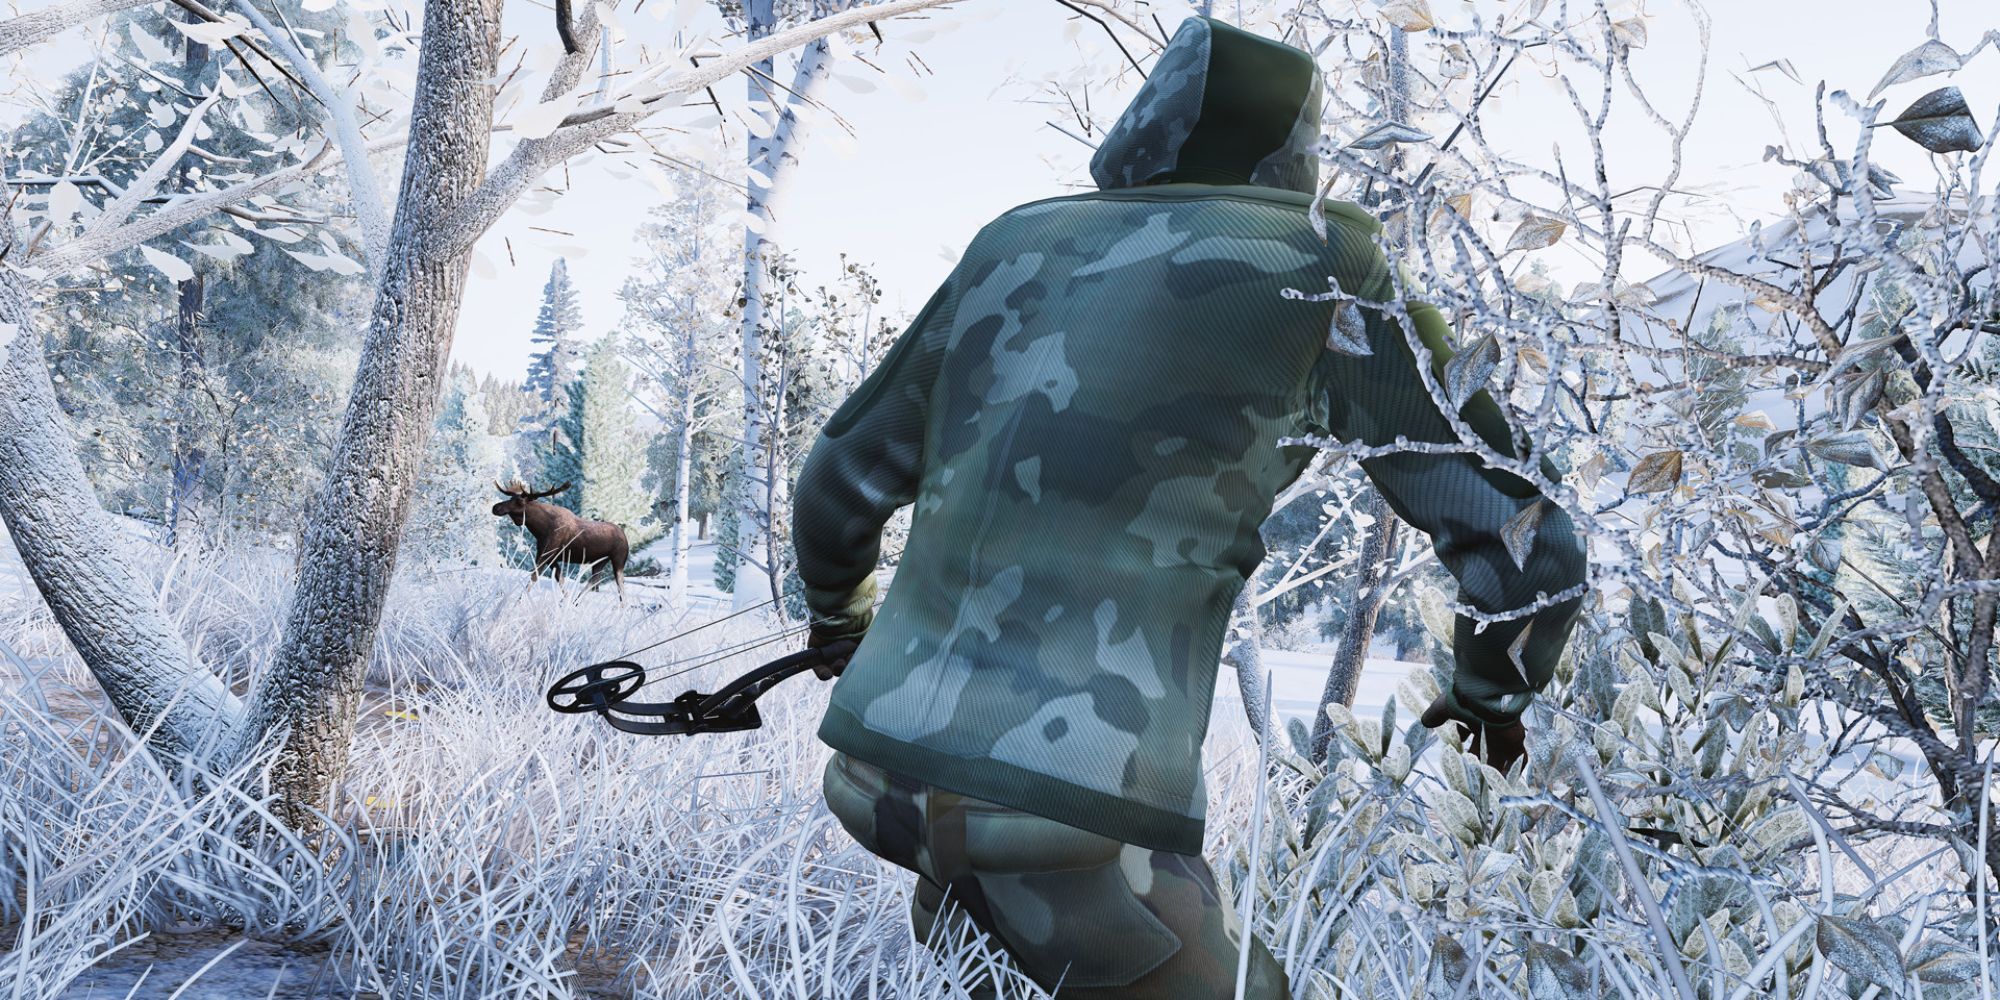 A player watching its prey in Hunting Simulator